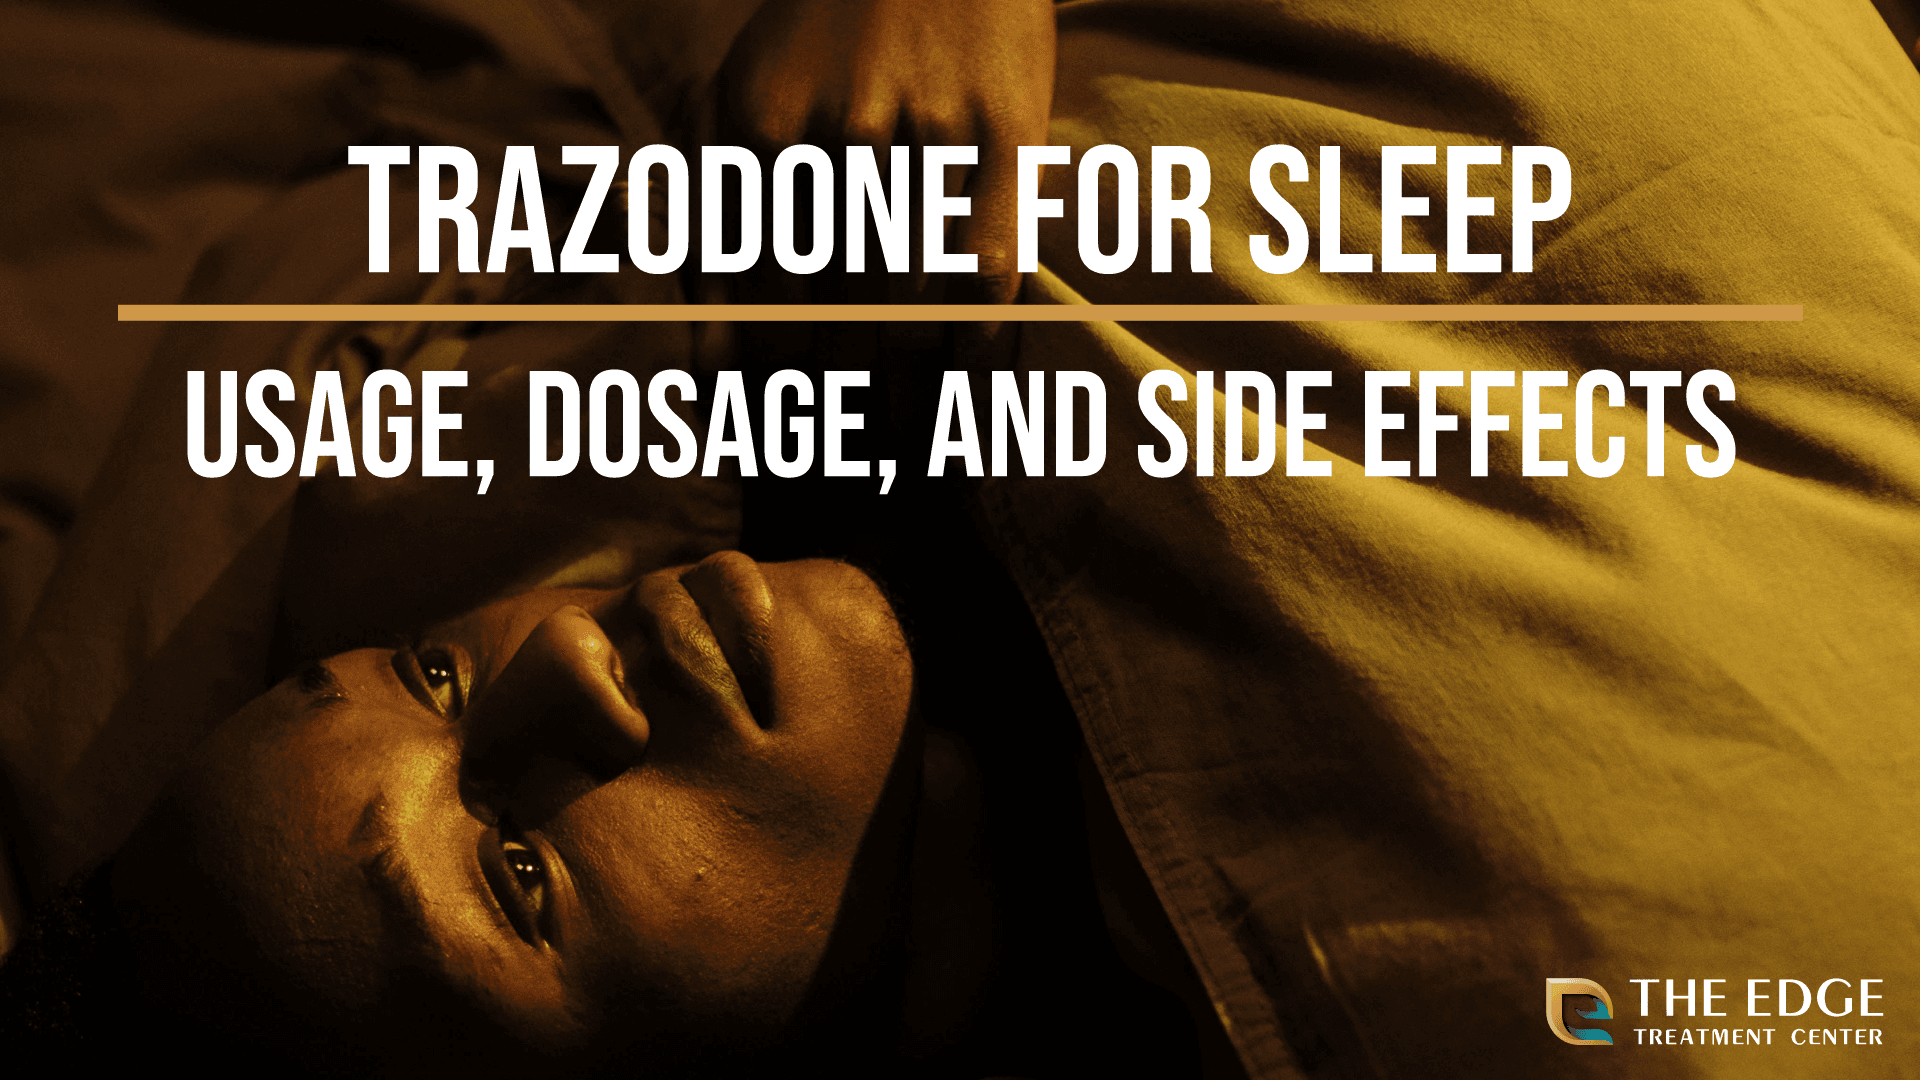 Trazodone for Sleep: Usage, Dosage, and Side Effects